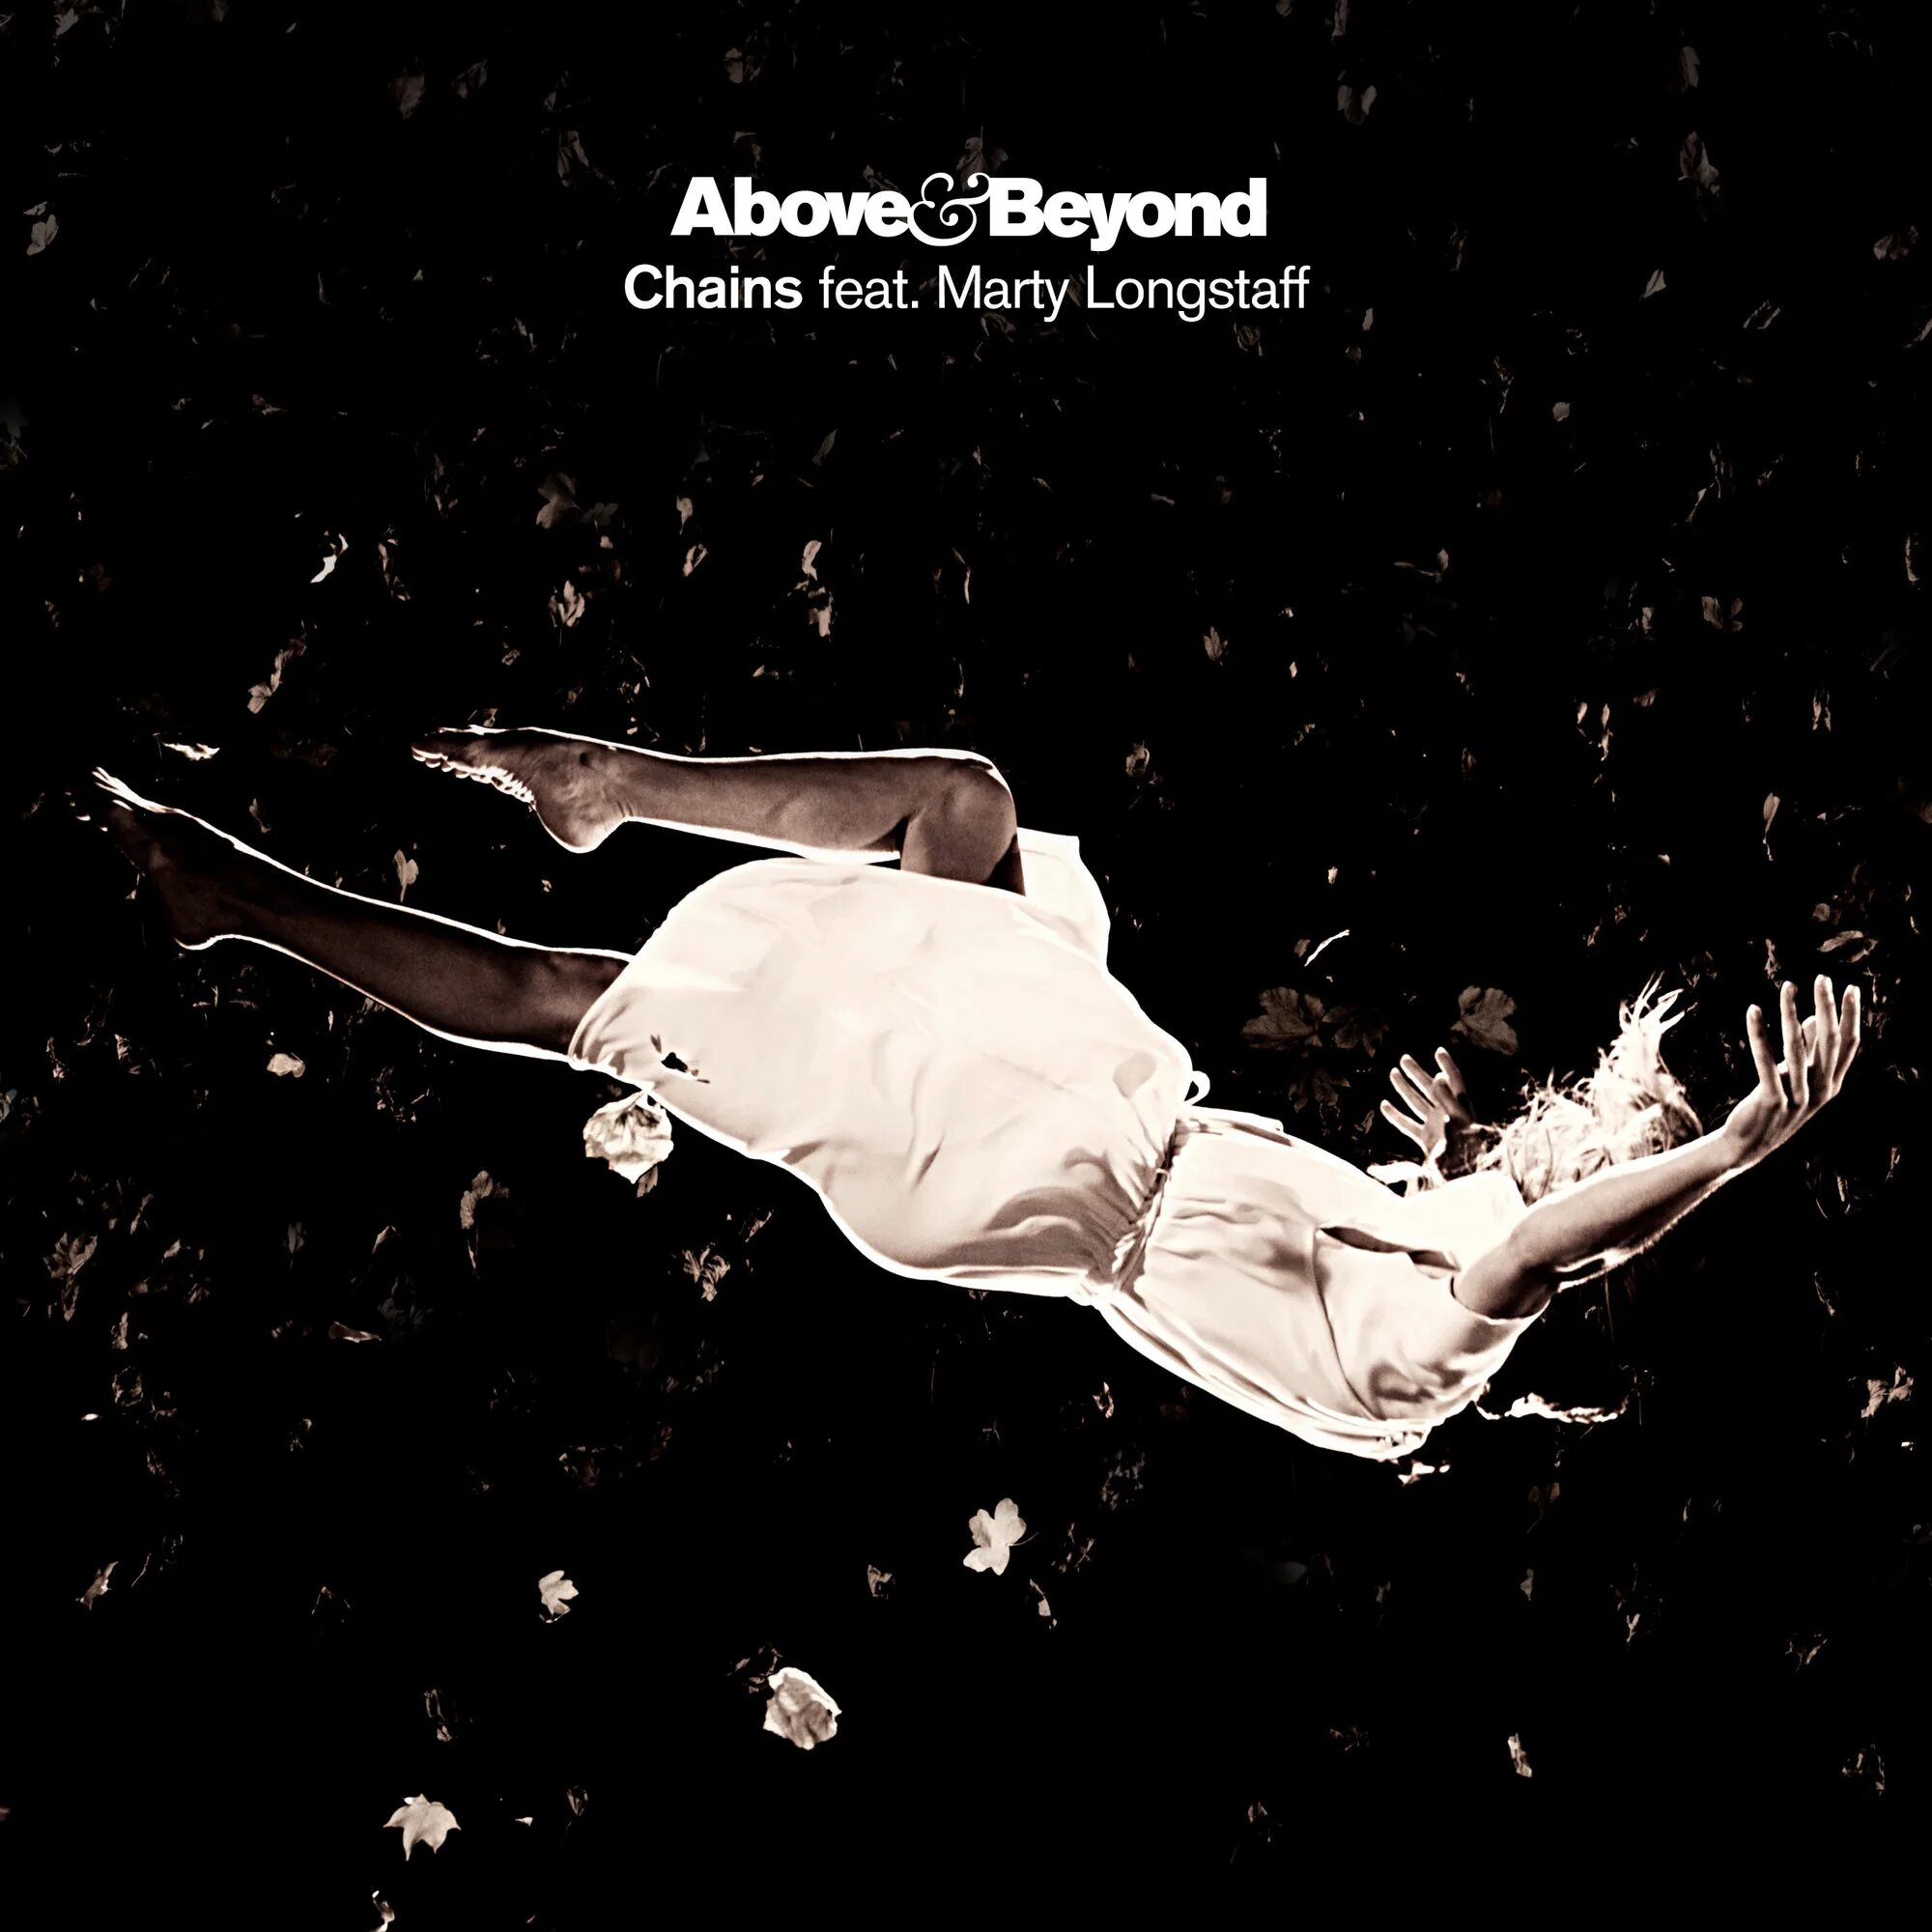 Chains above & Beyond ft. Marty Longstaff. Sean Longstaff. Above & Beyond feat. Marty Longstaff - Tightrope (above & Beyond Club Mix). Ласт бейонд